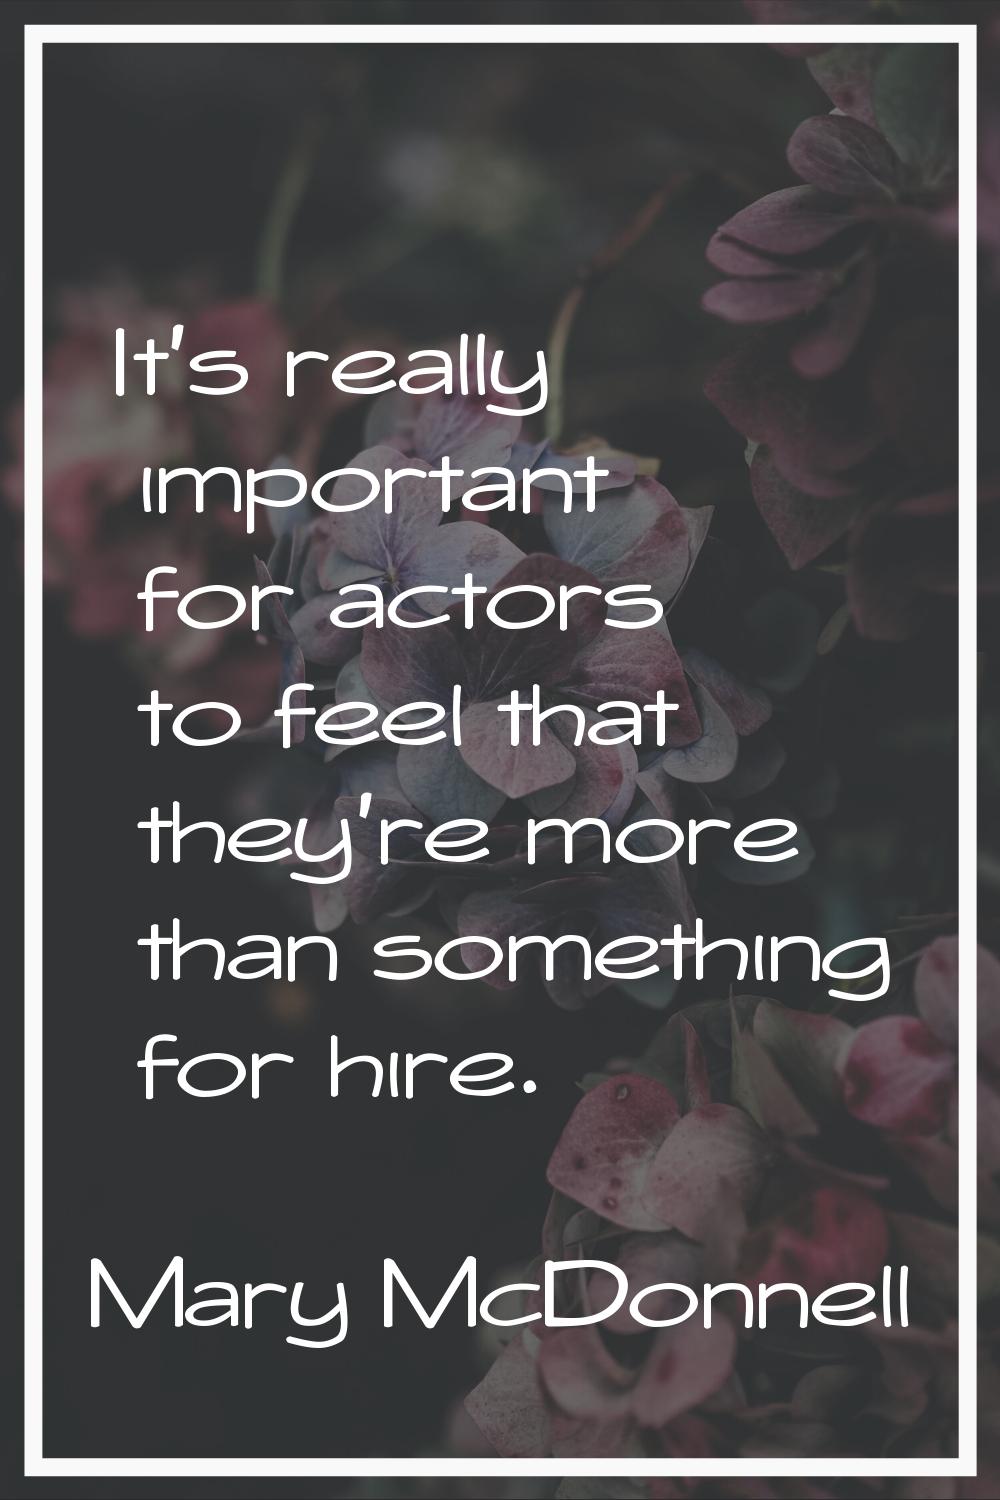 It's really important for actors to feel that they're more than something for hire.